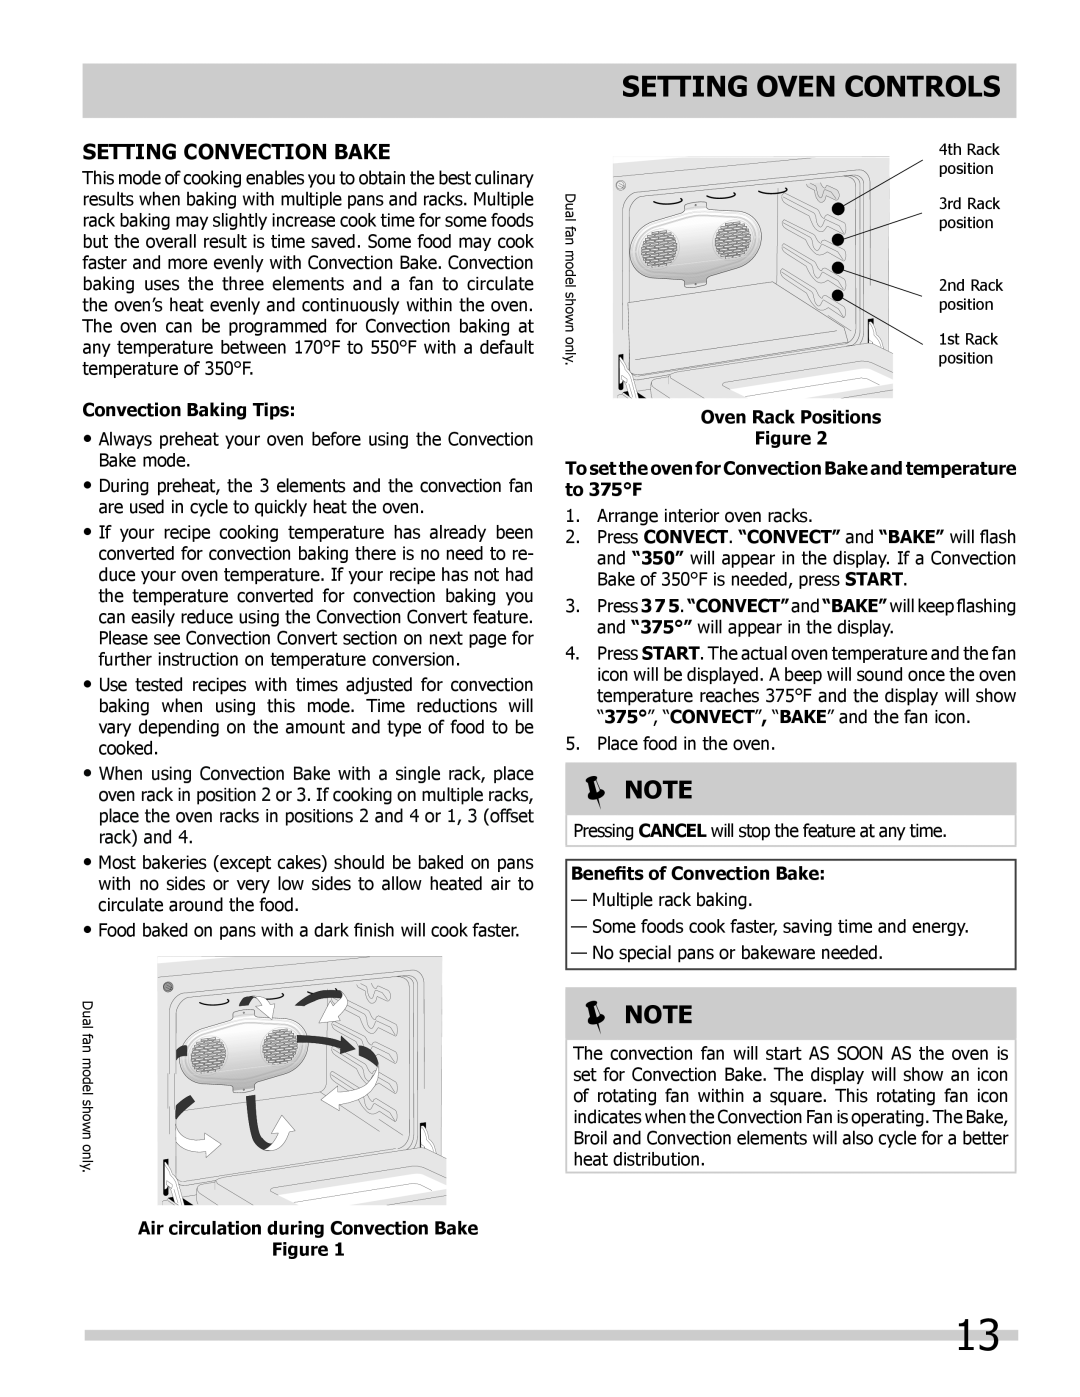 Frigidaire 318205307 Setting Oven Controls, Setting Convection Bake, Convection Baking Tips, Oven Rack Positions,  Note 